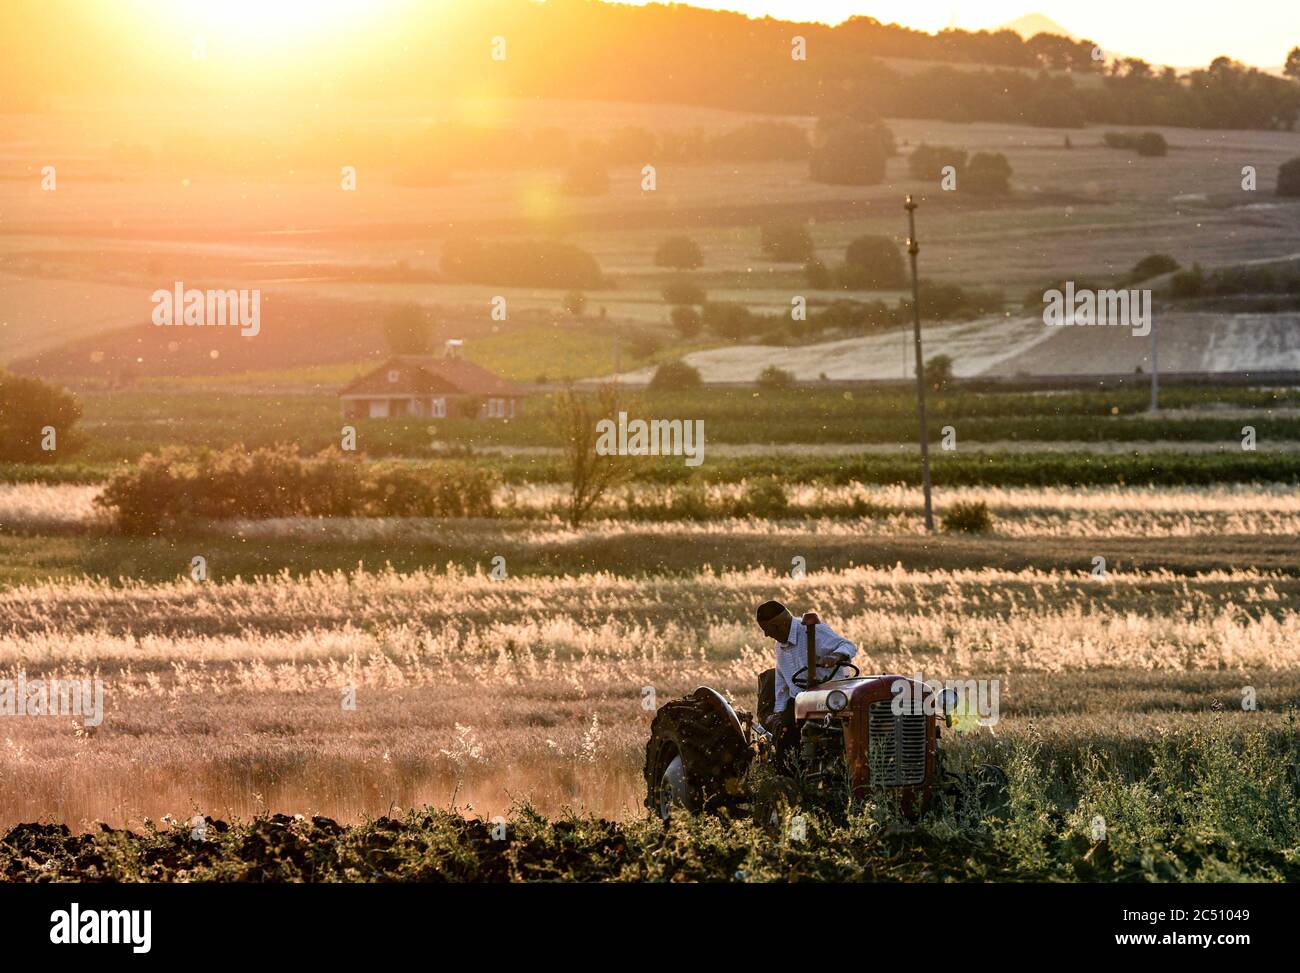 Kumanovo, North Macedonia. 29th June, 2020. A farmer plows a field at a village near Kumanovo, North Macedonia, on June 29, 2020. A heat wave hit North Macedonia on Monday and the temperature reached 38 degrees Celsius. Credit: Tomislav Georgiev/Xinhua/Alamy Live News Stock Photo